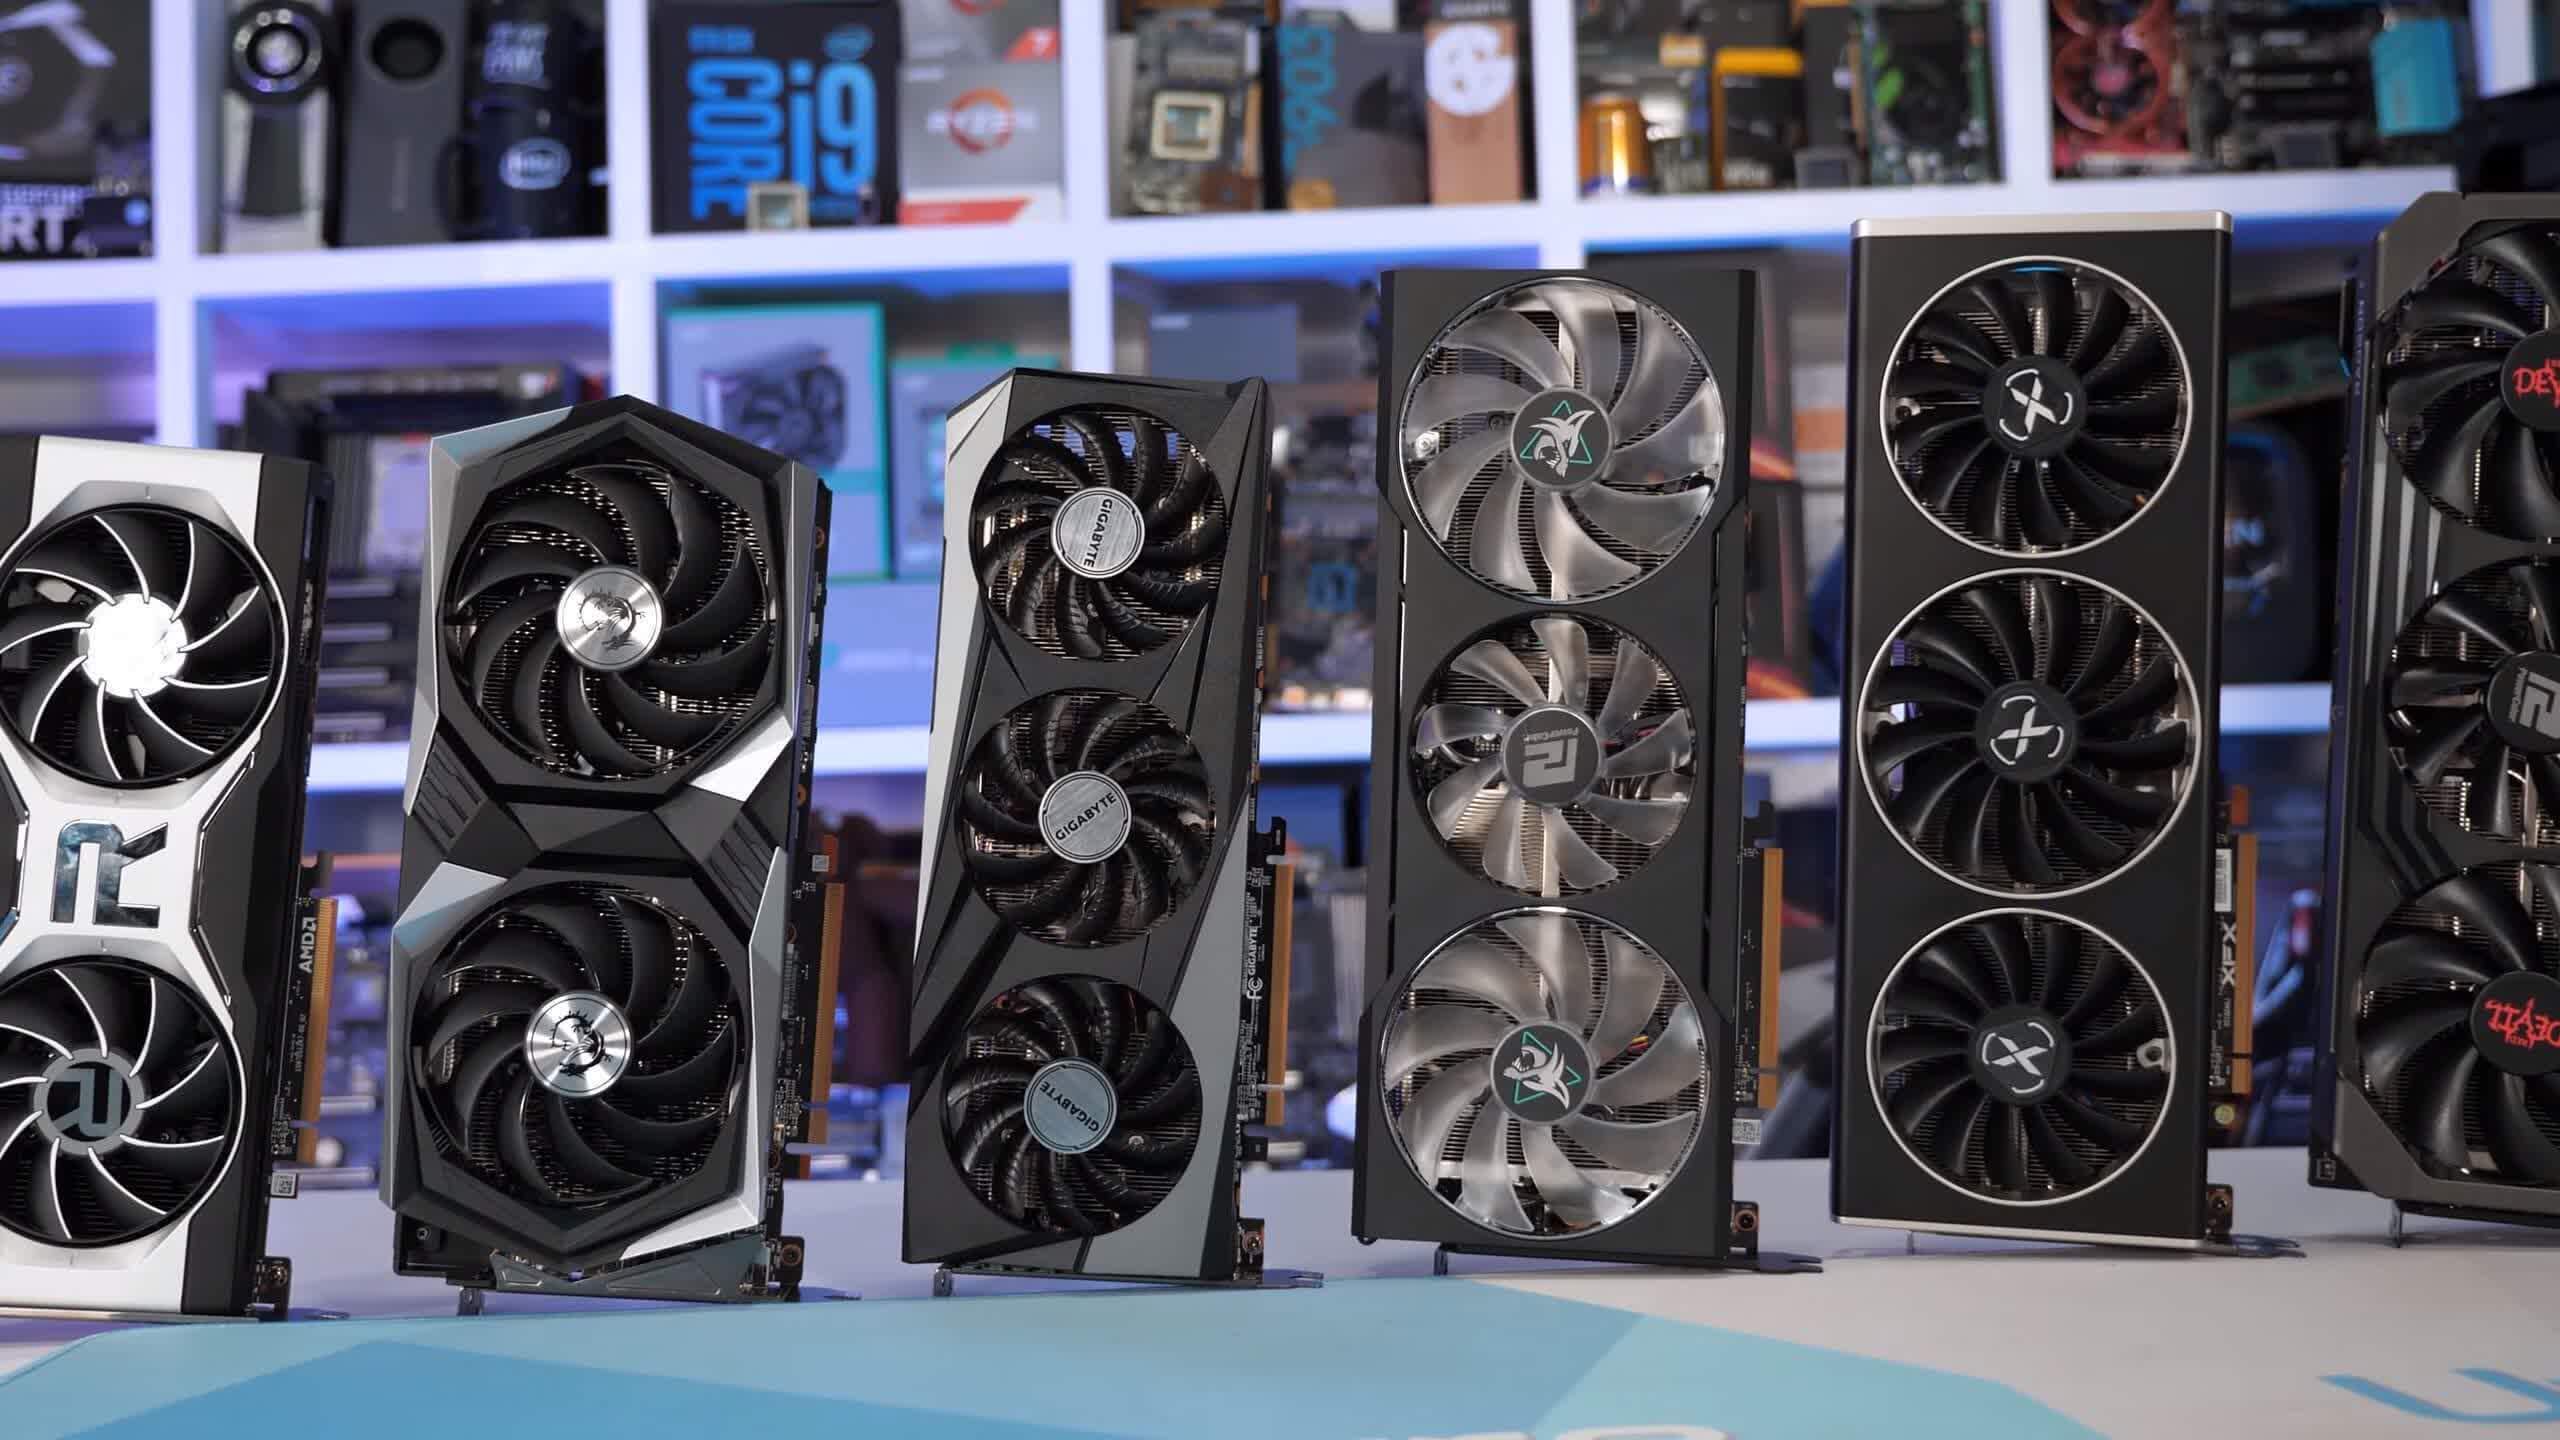 October Steam survey: more powerful cards popular again, AMD CPU share falls below 30%